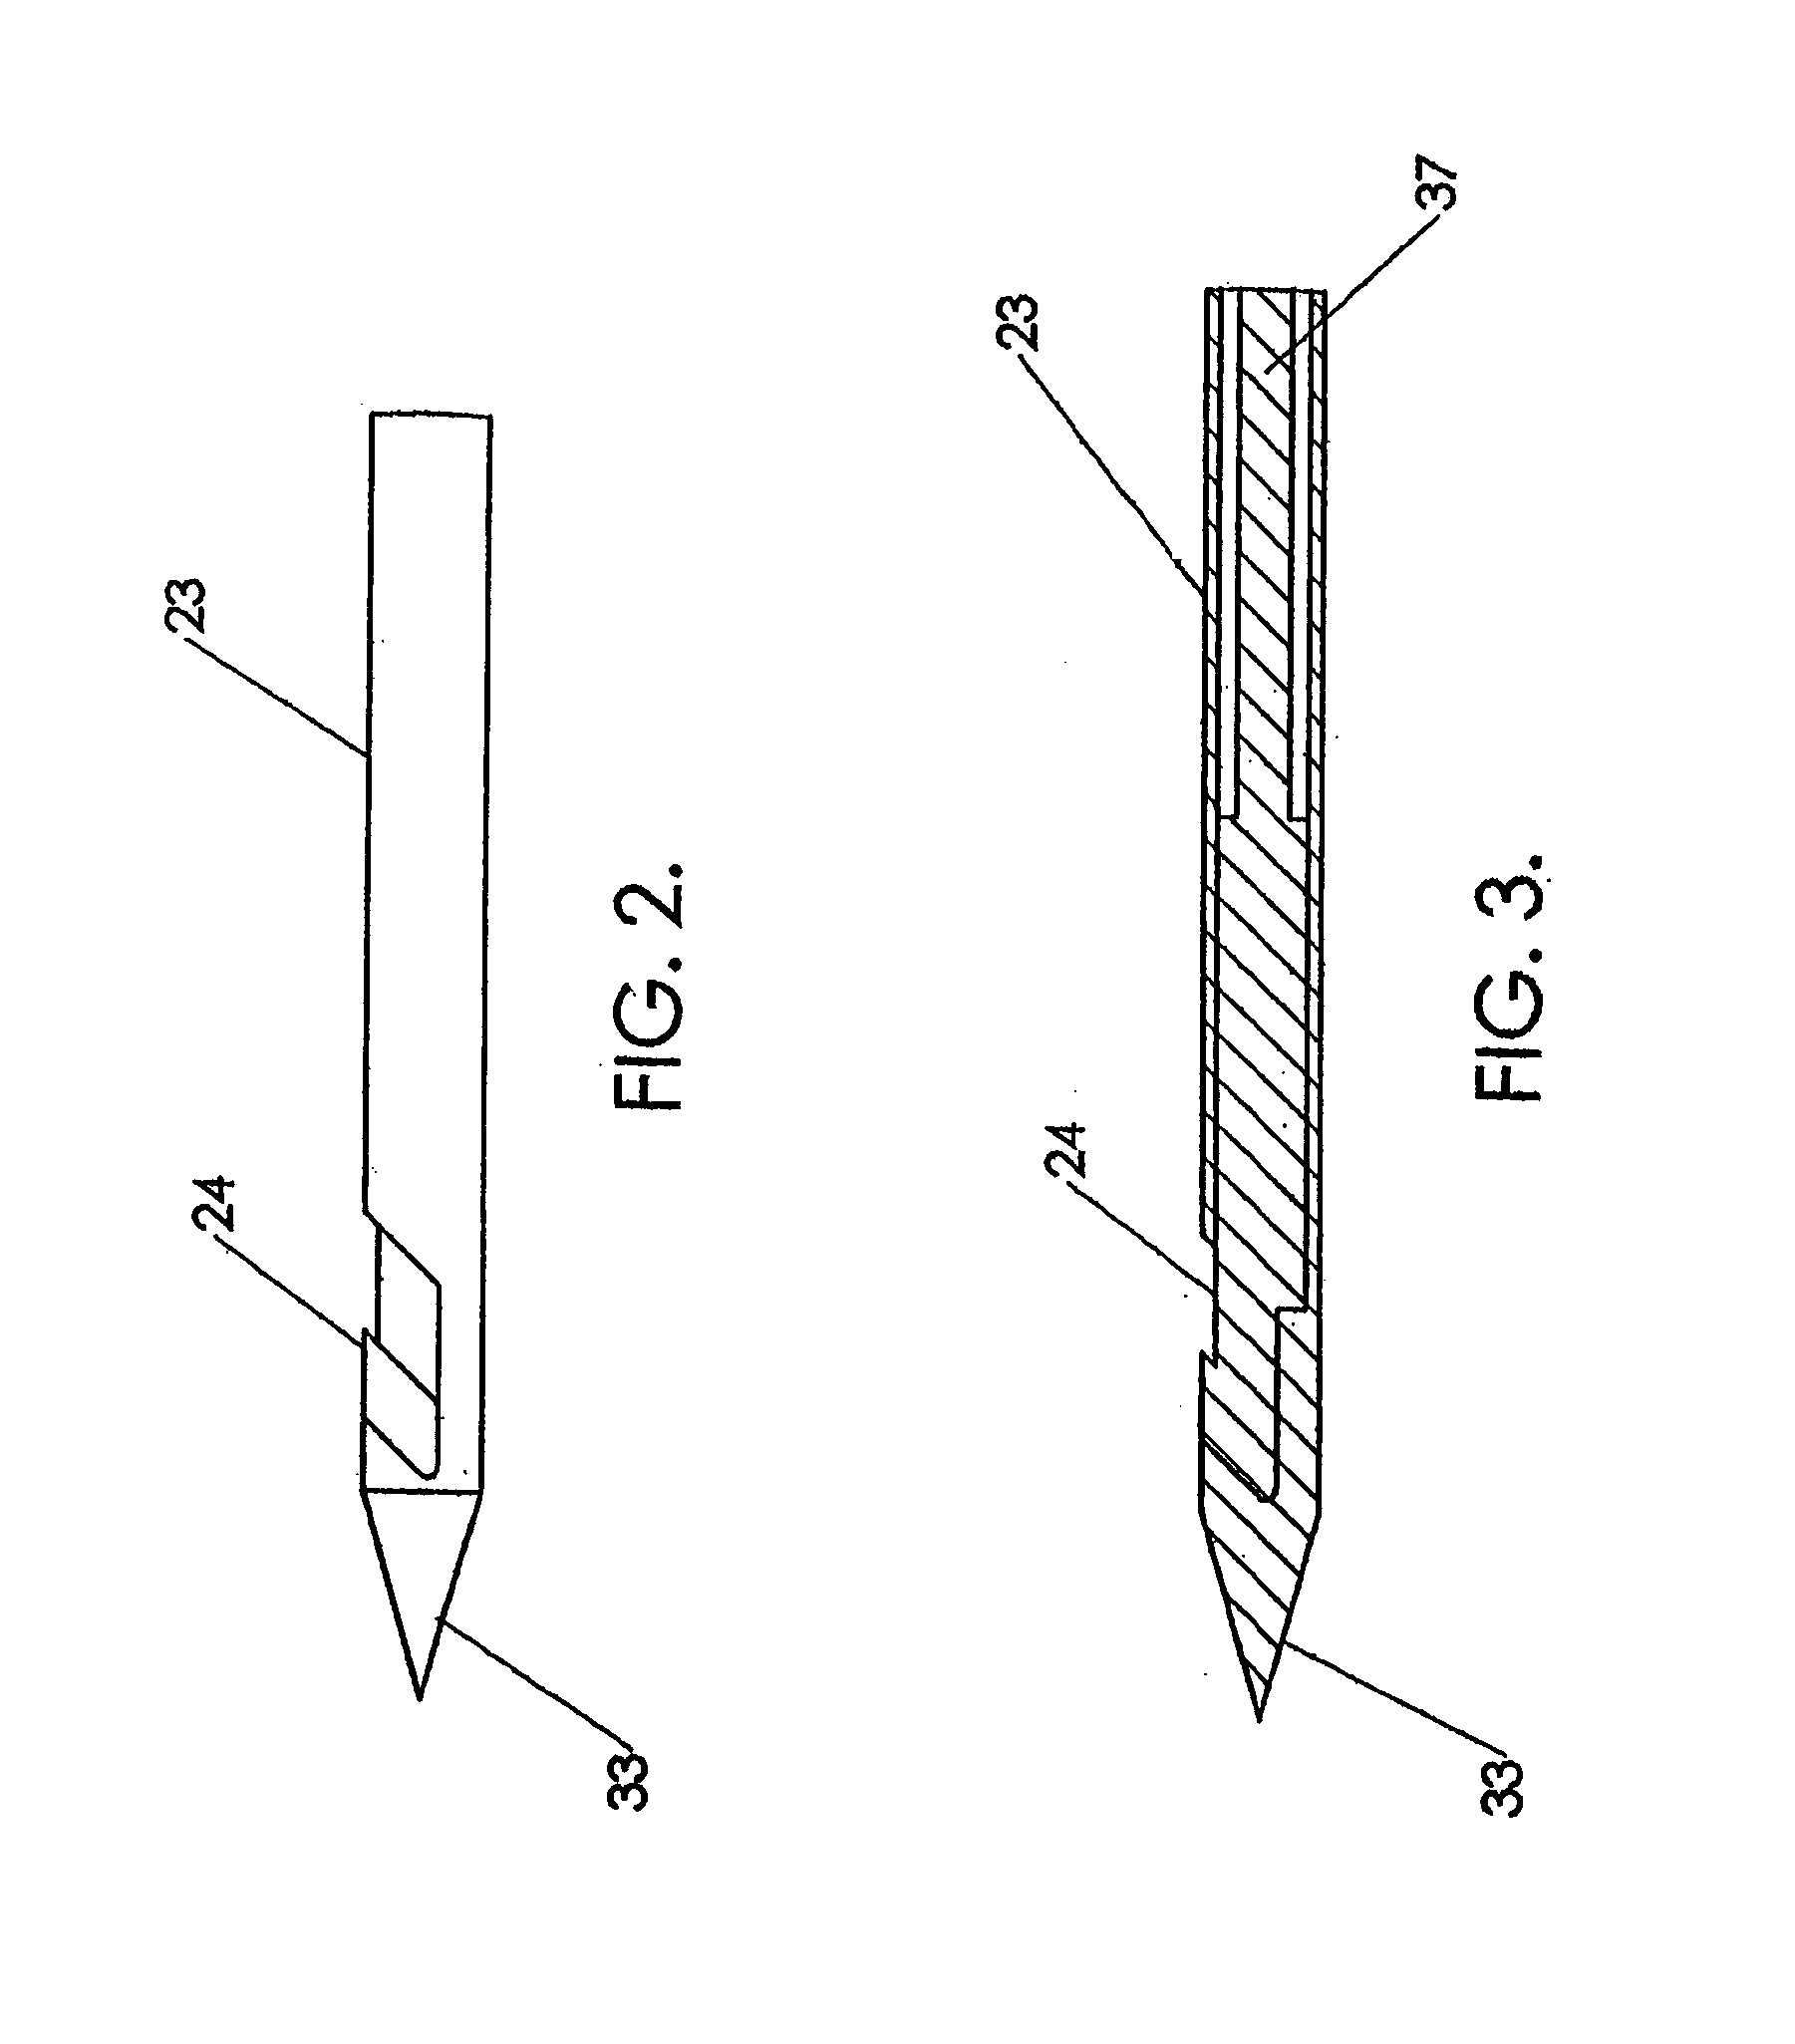 Surgical closure instrument and methods